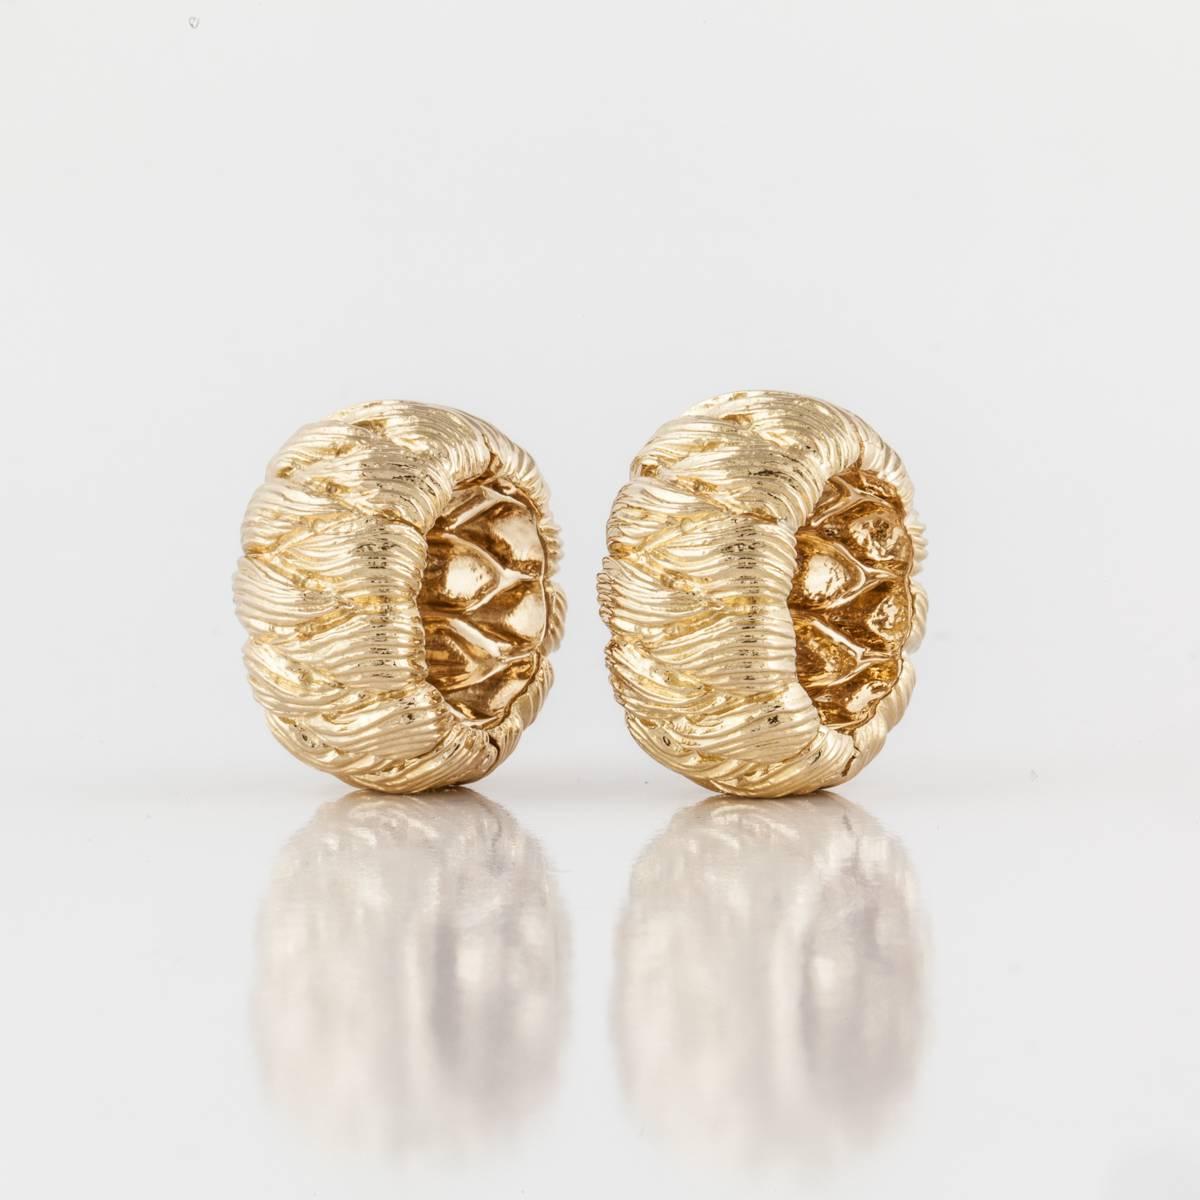 David Webb textured hoop earrings crafted in 18K yellow gold.  The gold is deeply textured with a classic design.  They measure 1 inch long and 3/4 inches wide.  Clip style.